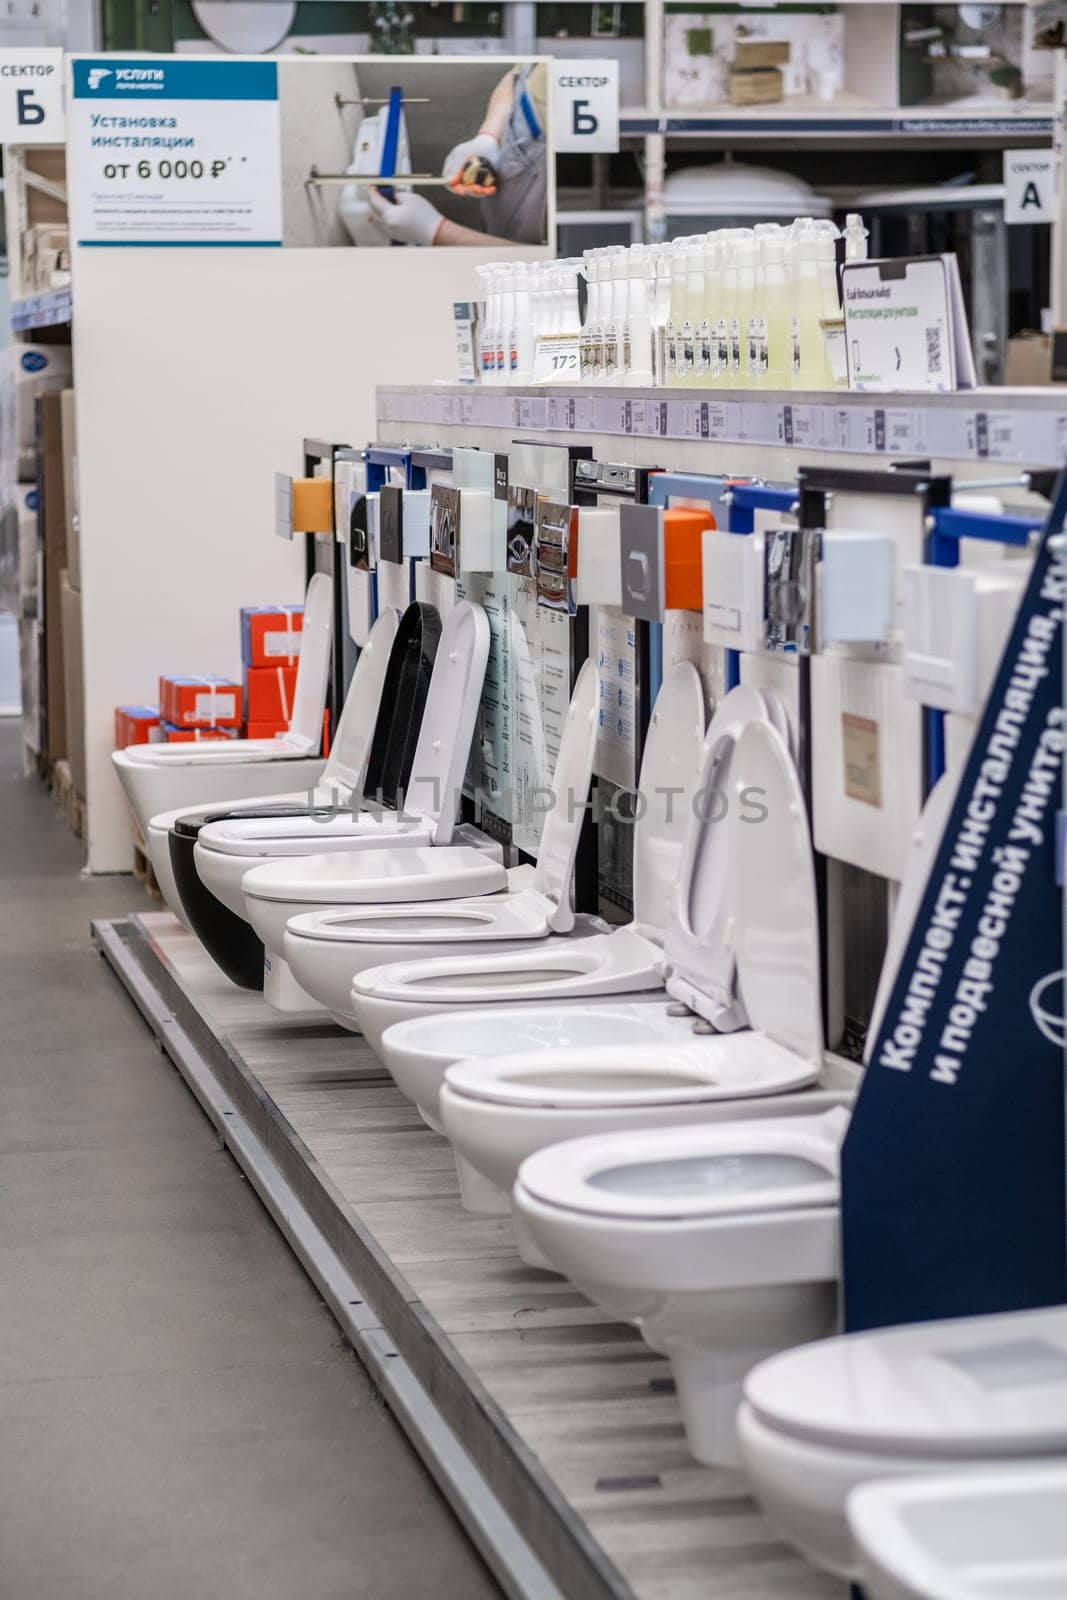 Moscow, Russia, March 3, 2024. A row of porcelain toilets is neatly lined up in the stores tableware section, showcasing the latest in engineering and serveware technology